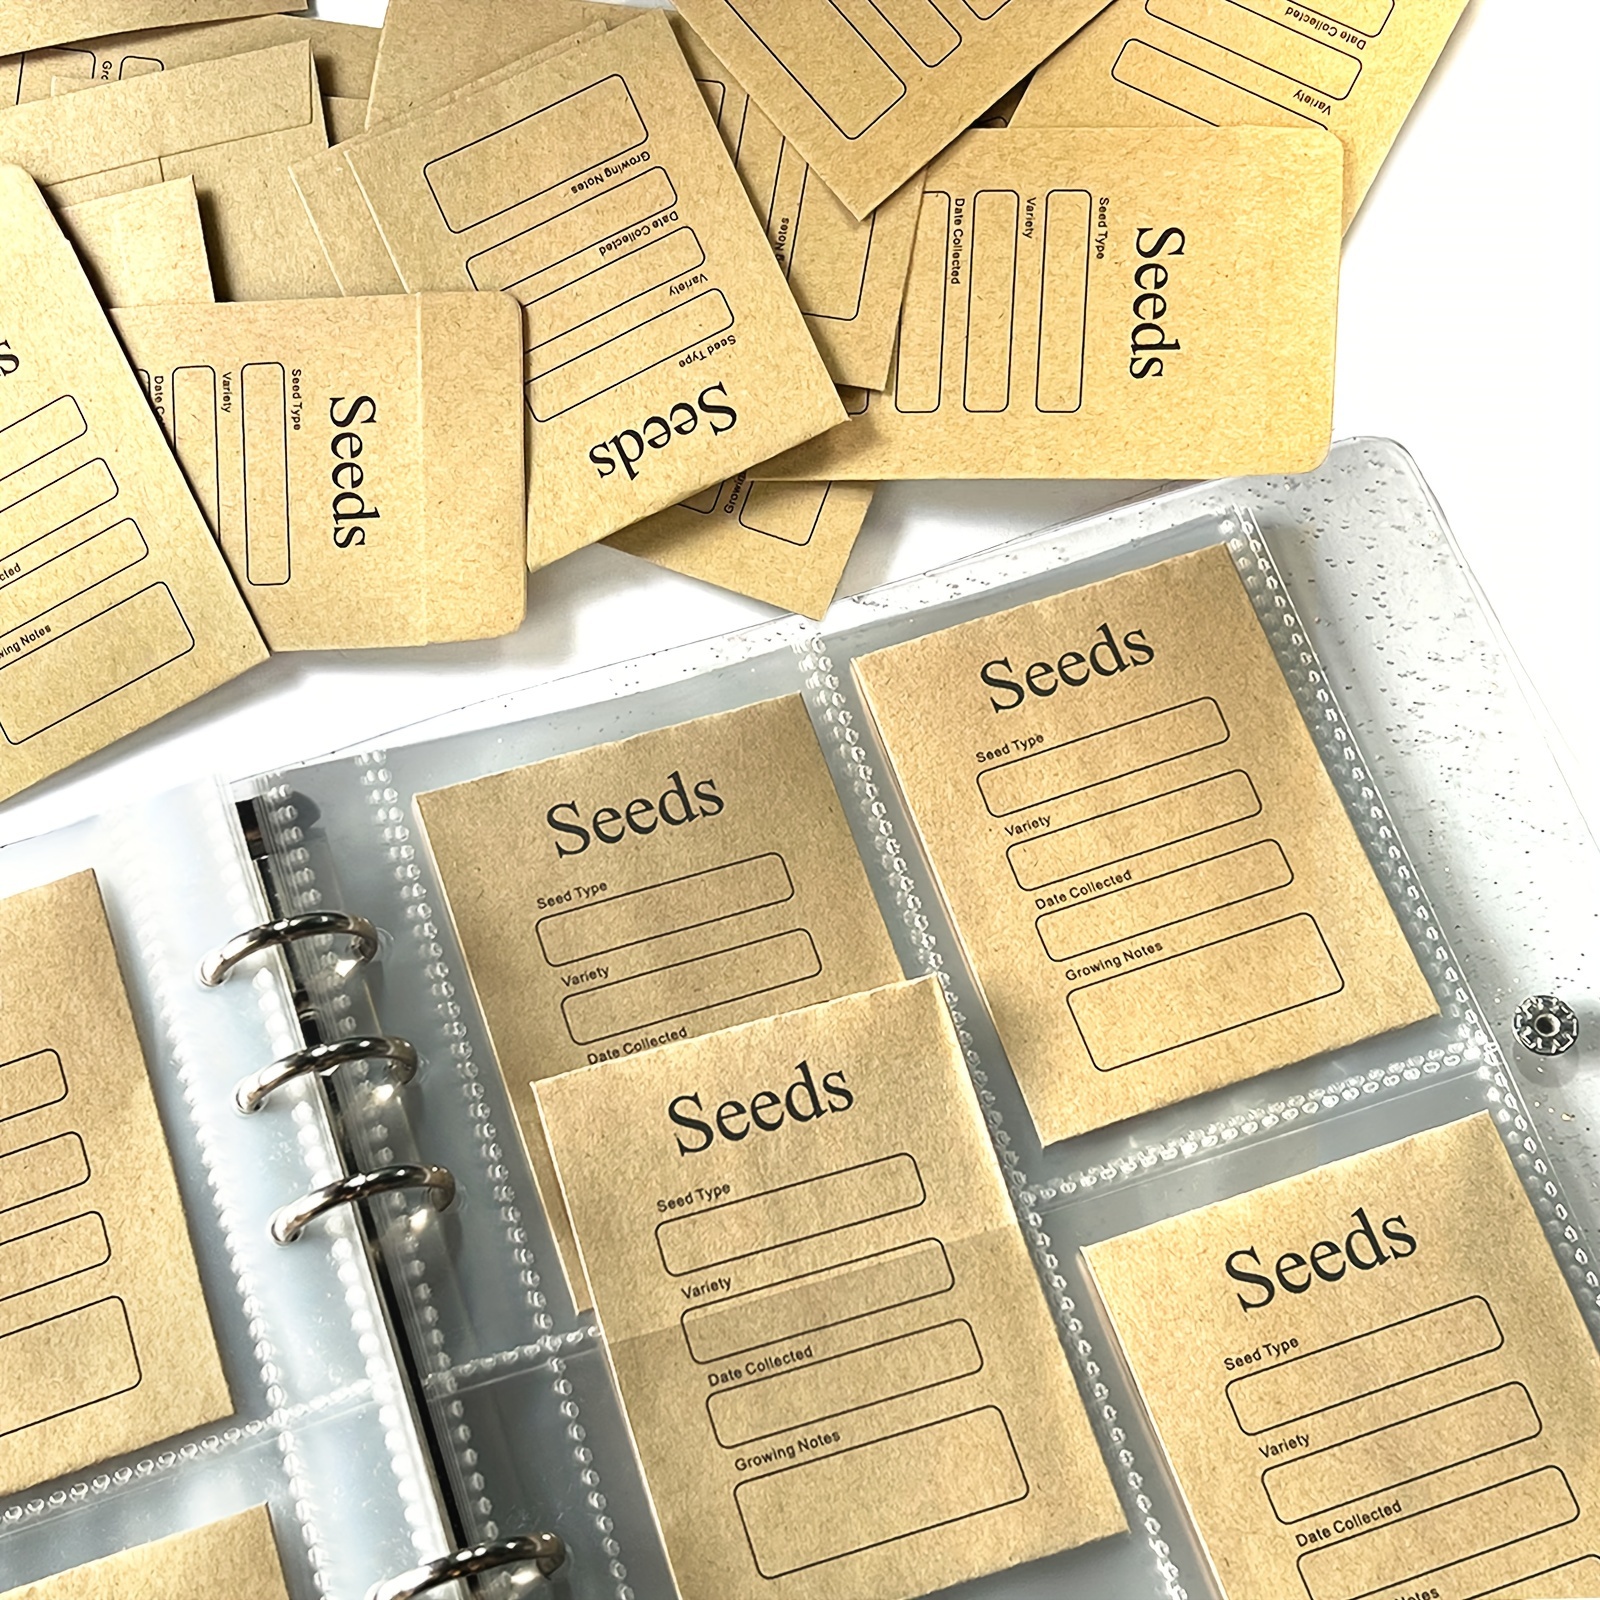  100Pcs Seed Packets Envelopes, Resealable Self Sealing Seed  Storage Organizers Seed Saving Envelopes, Garden Seed Pocket Bags  Organization Binder Seed Saver Pockets Seed Storage Envelope for Vegetable  : Office Products